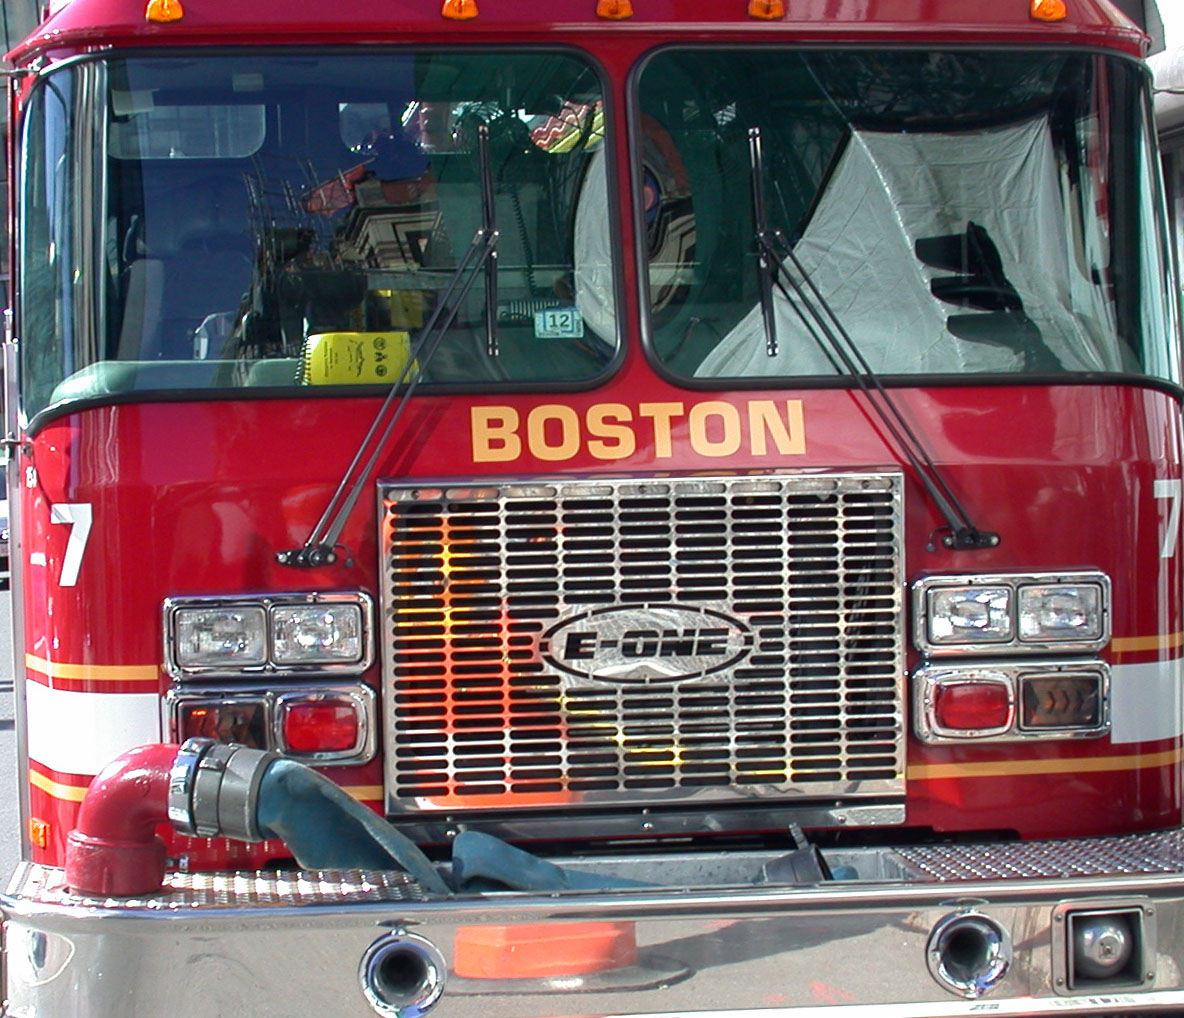 boston fire engine front - all rights reserved Ernest J. Bordini, Ph.D.